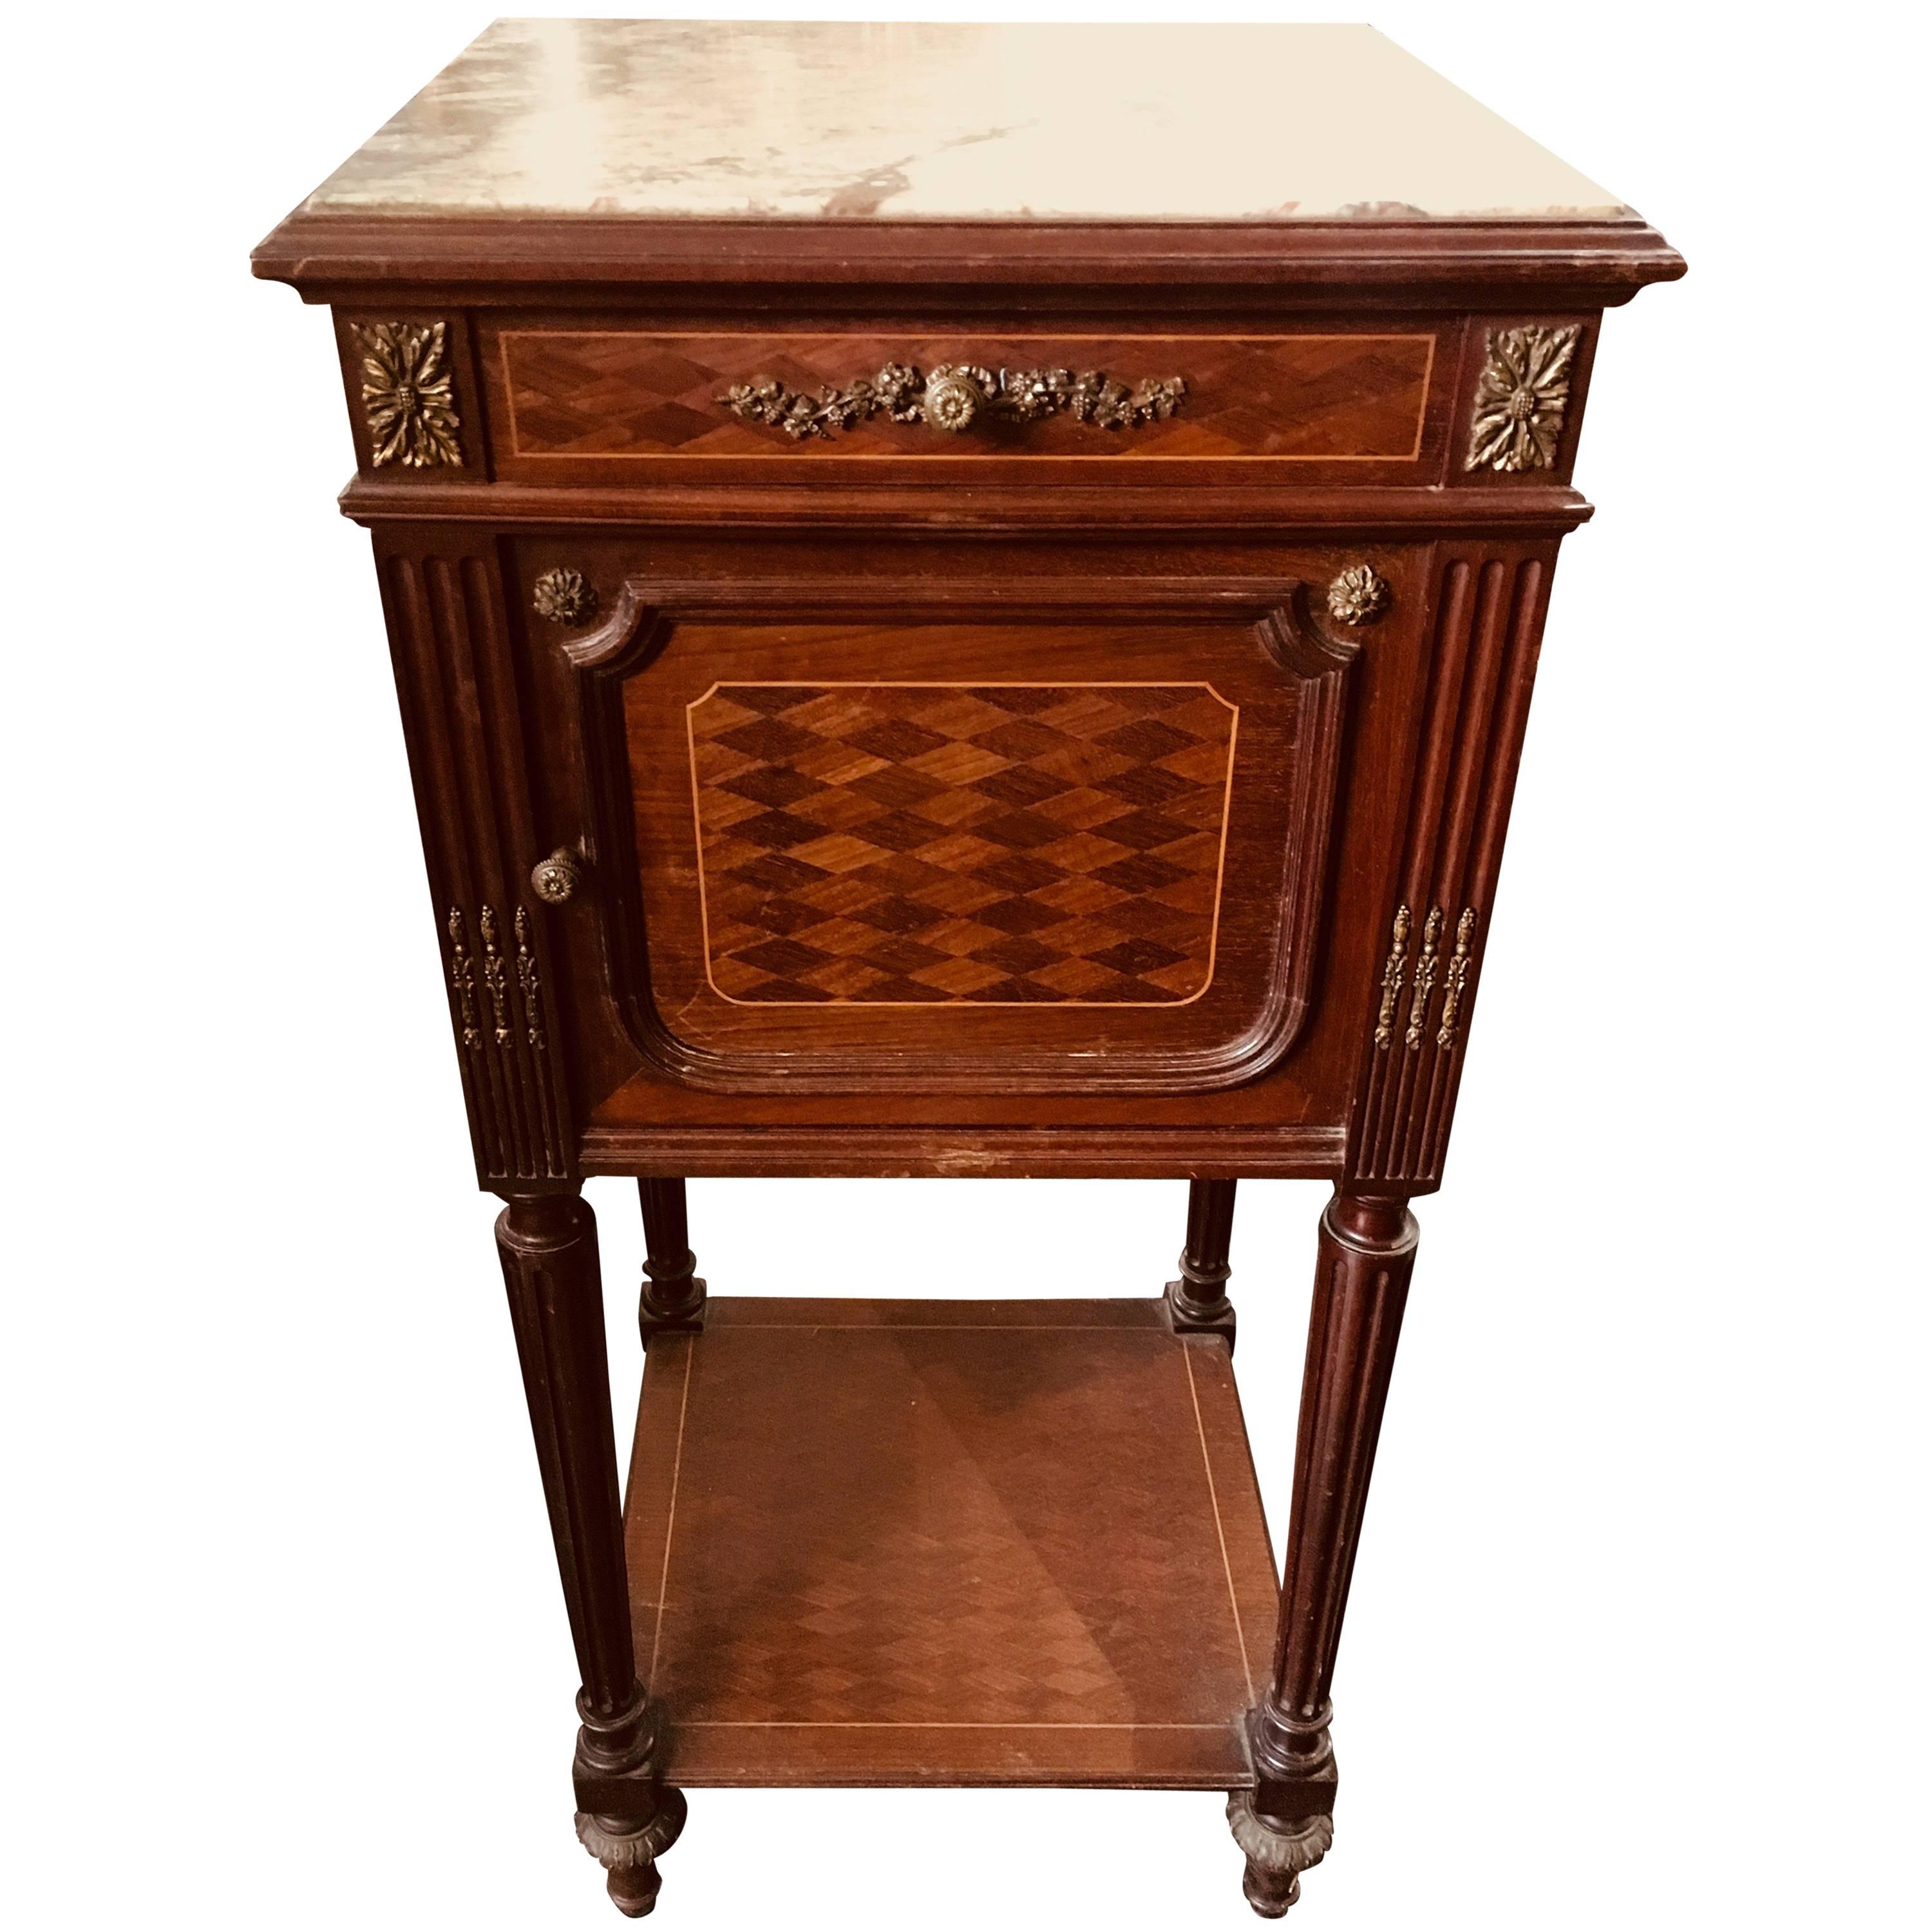 19th Century Mahogany Marble-Top Nightstand with Bronze Decoration